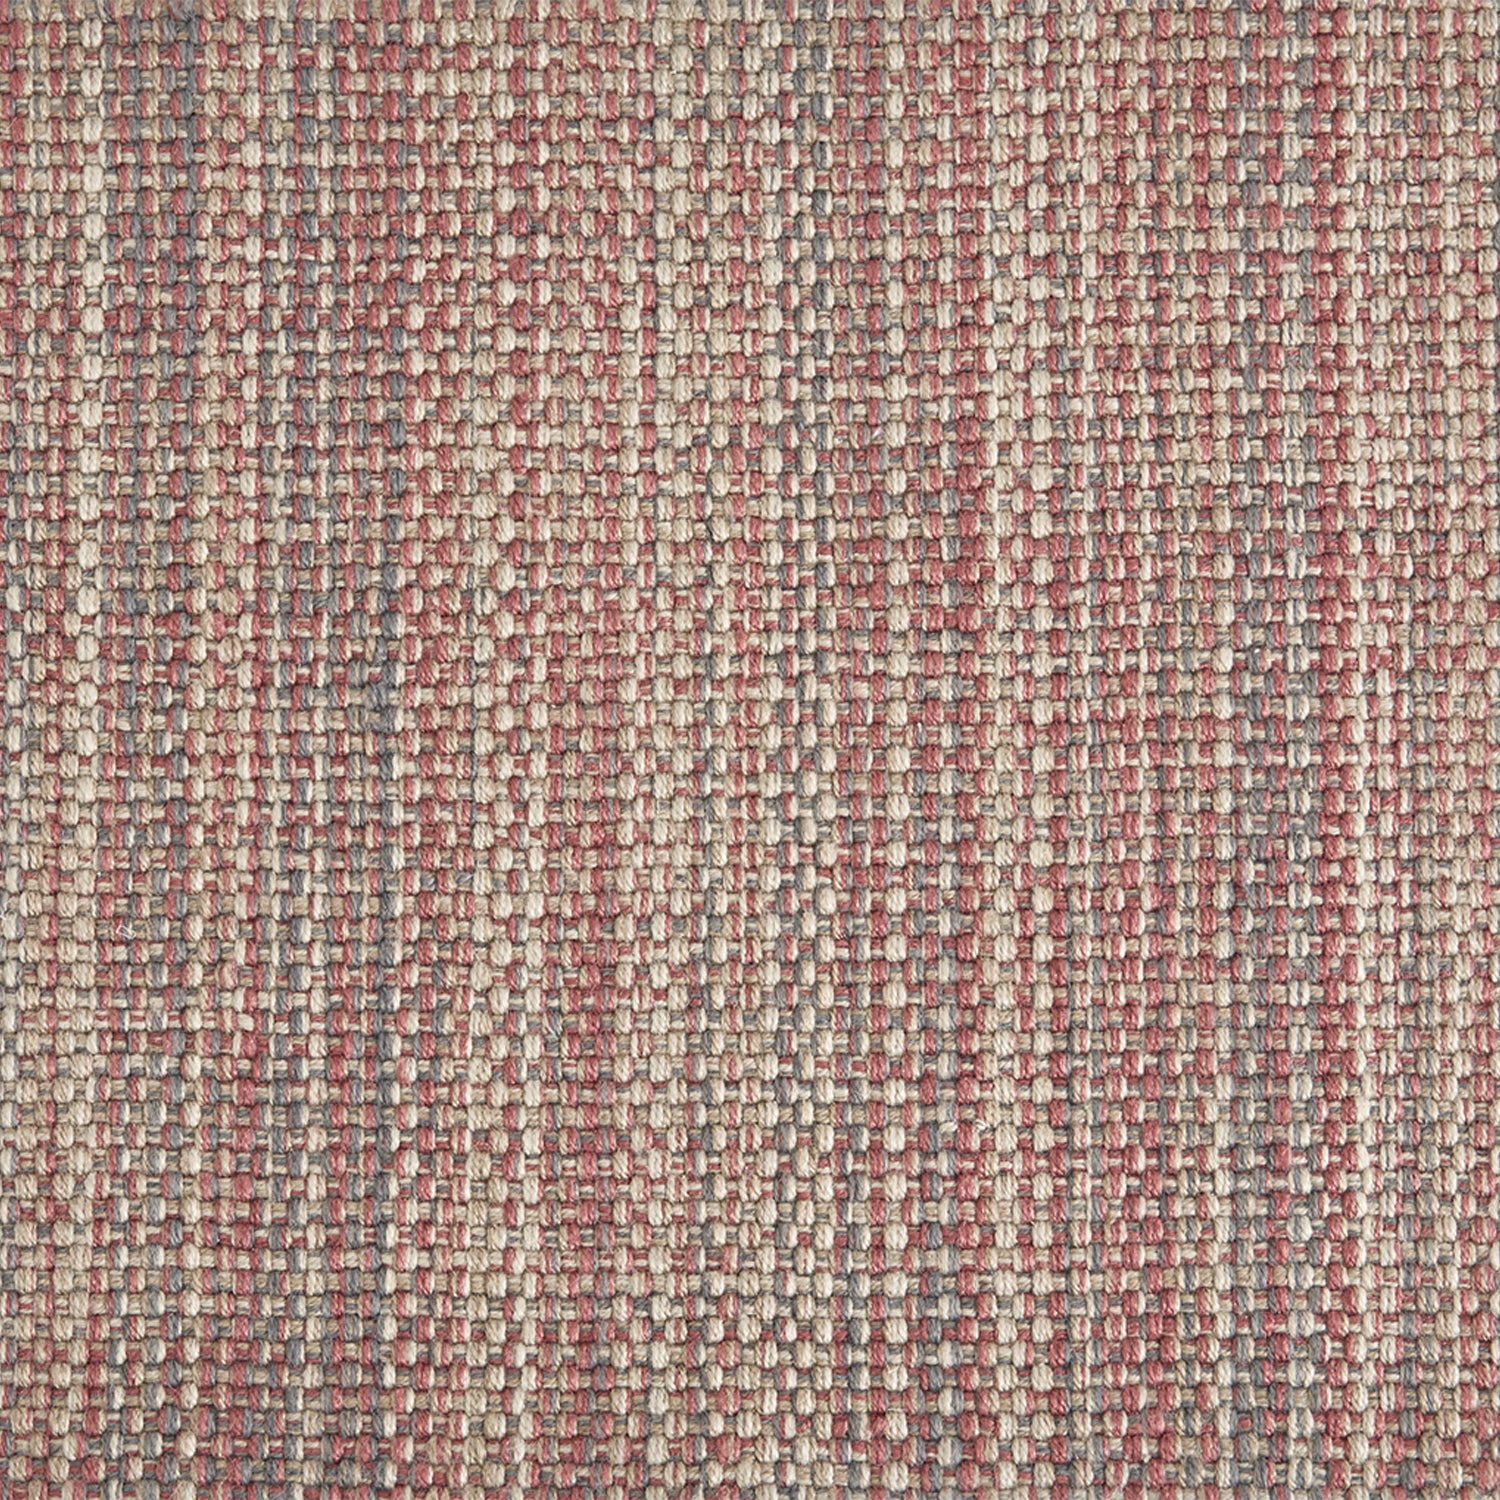 Outdoor broadloom carpet swatch in a chunky flatweave in mottled rose, cream and gray.